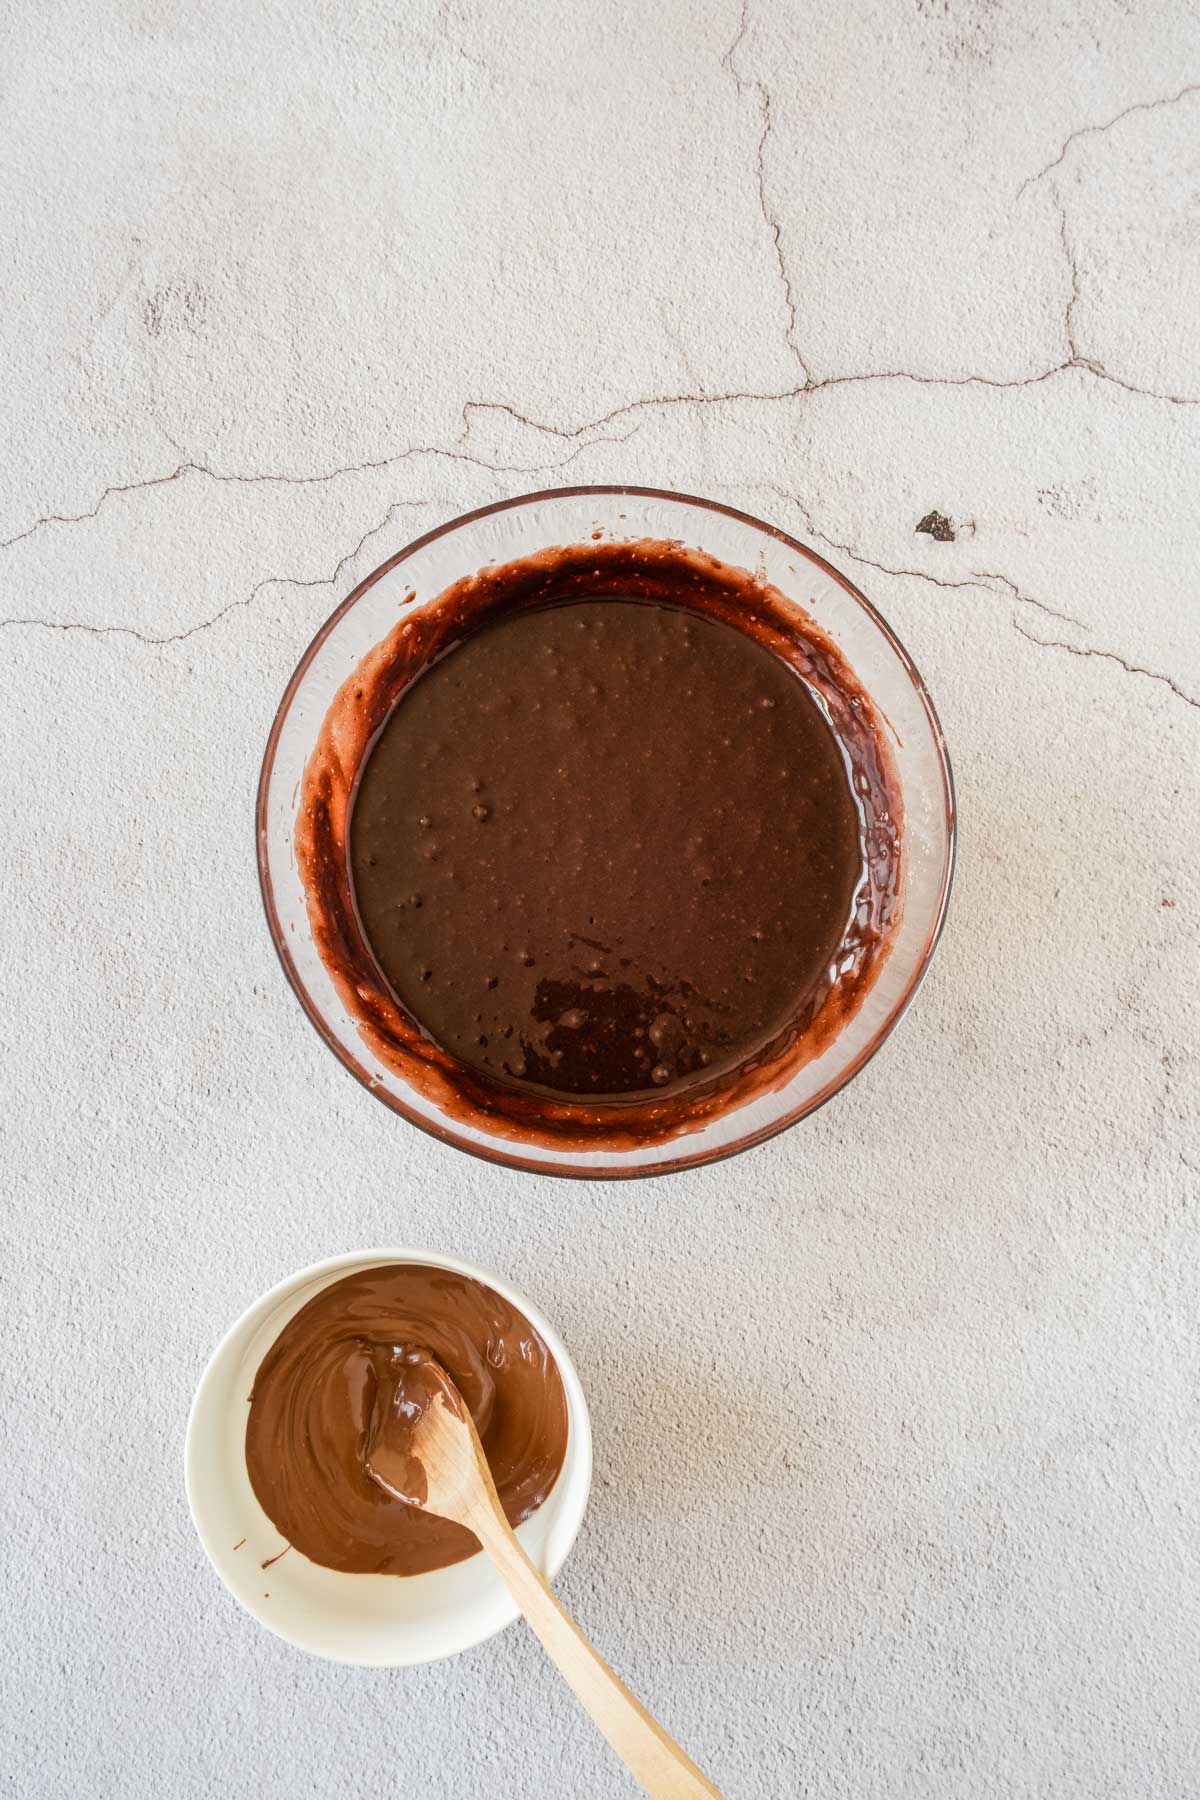 A bowl of mixed chocolate batter alongside a smaller bowl with melted chocolate and a wooden spoon, on a textured white surface.